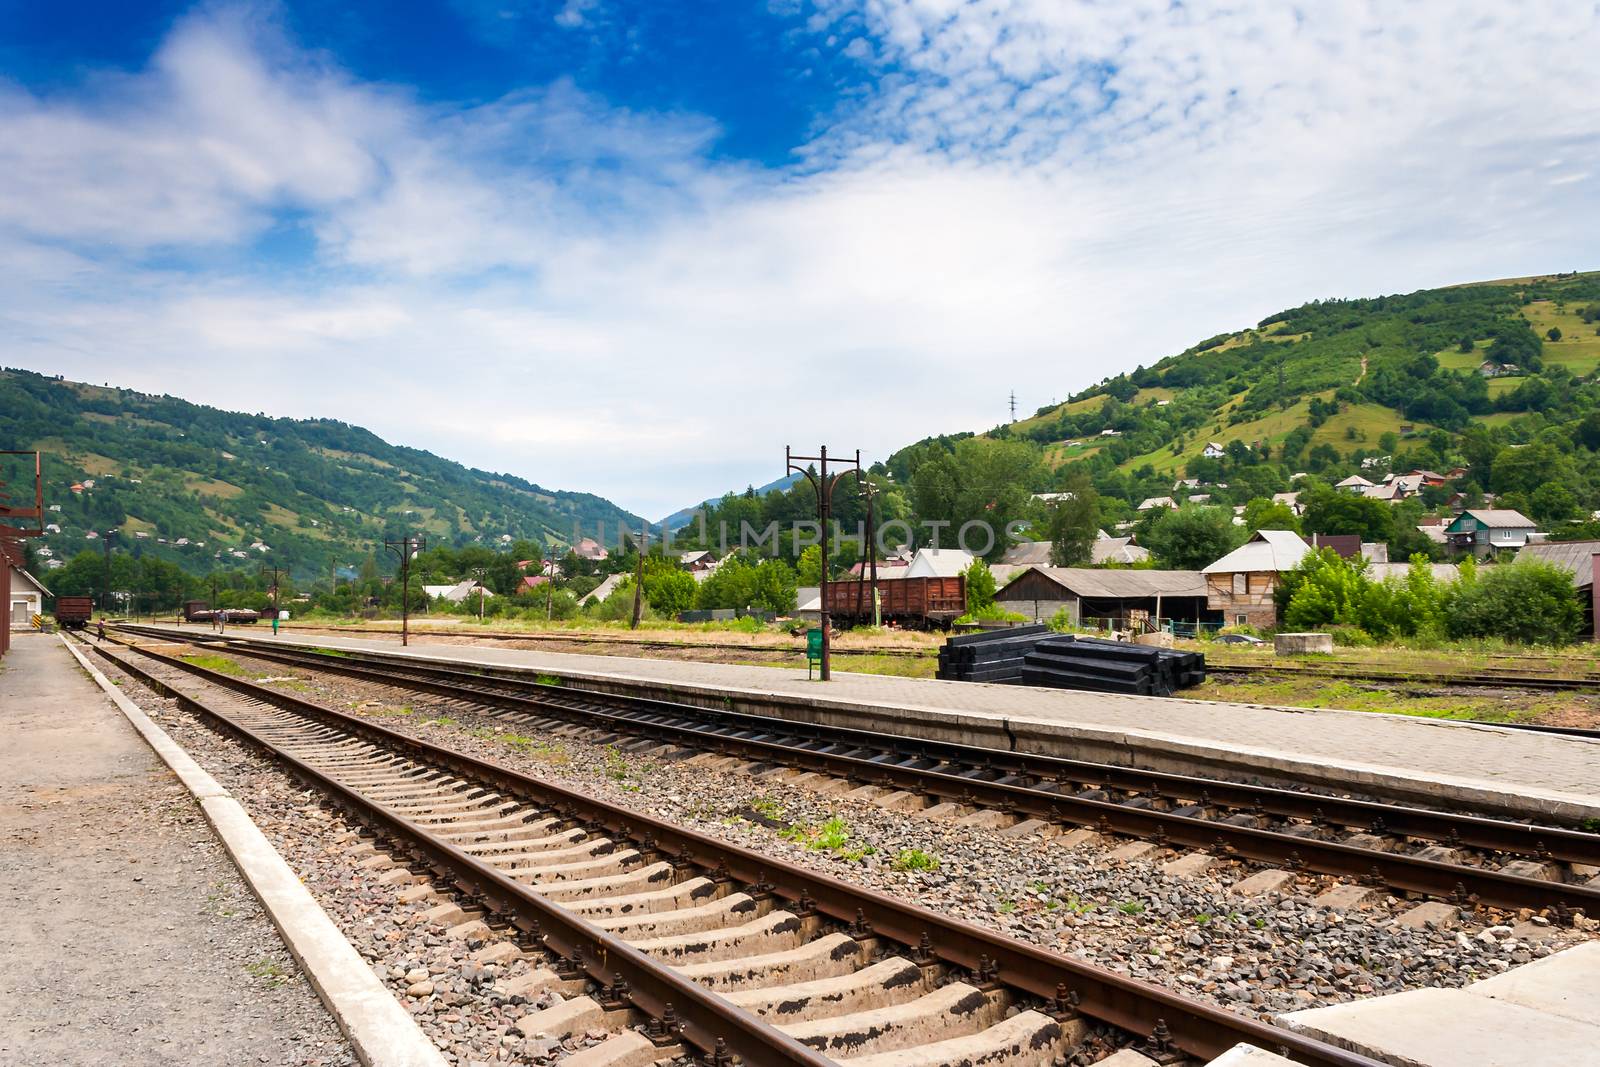 railroad of railway station in countryside which goes through the mountains under blue sky